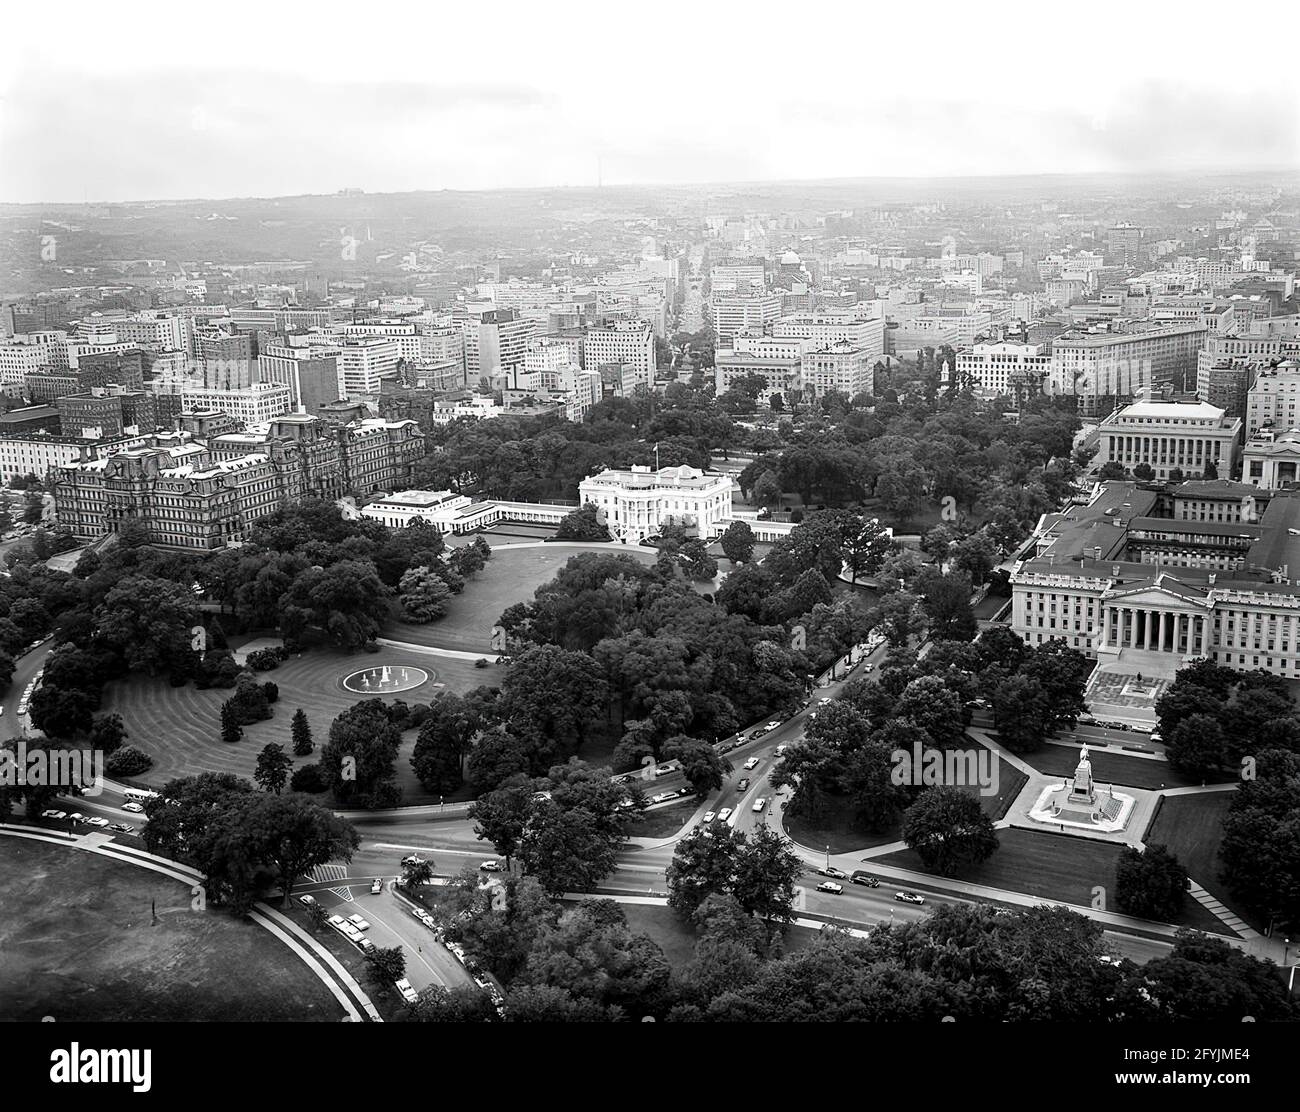 Aerial photo of Washington, D.C. and the North Front and South Rear of the White House taken from Lafayette Park in President's Park. Also included in the photograph are the Ellipse, Washington Monument, Jefferson Memorial, Executive Office Building, and the United States Department of the Treasury building. Stock Photo